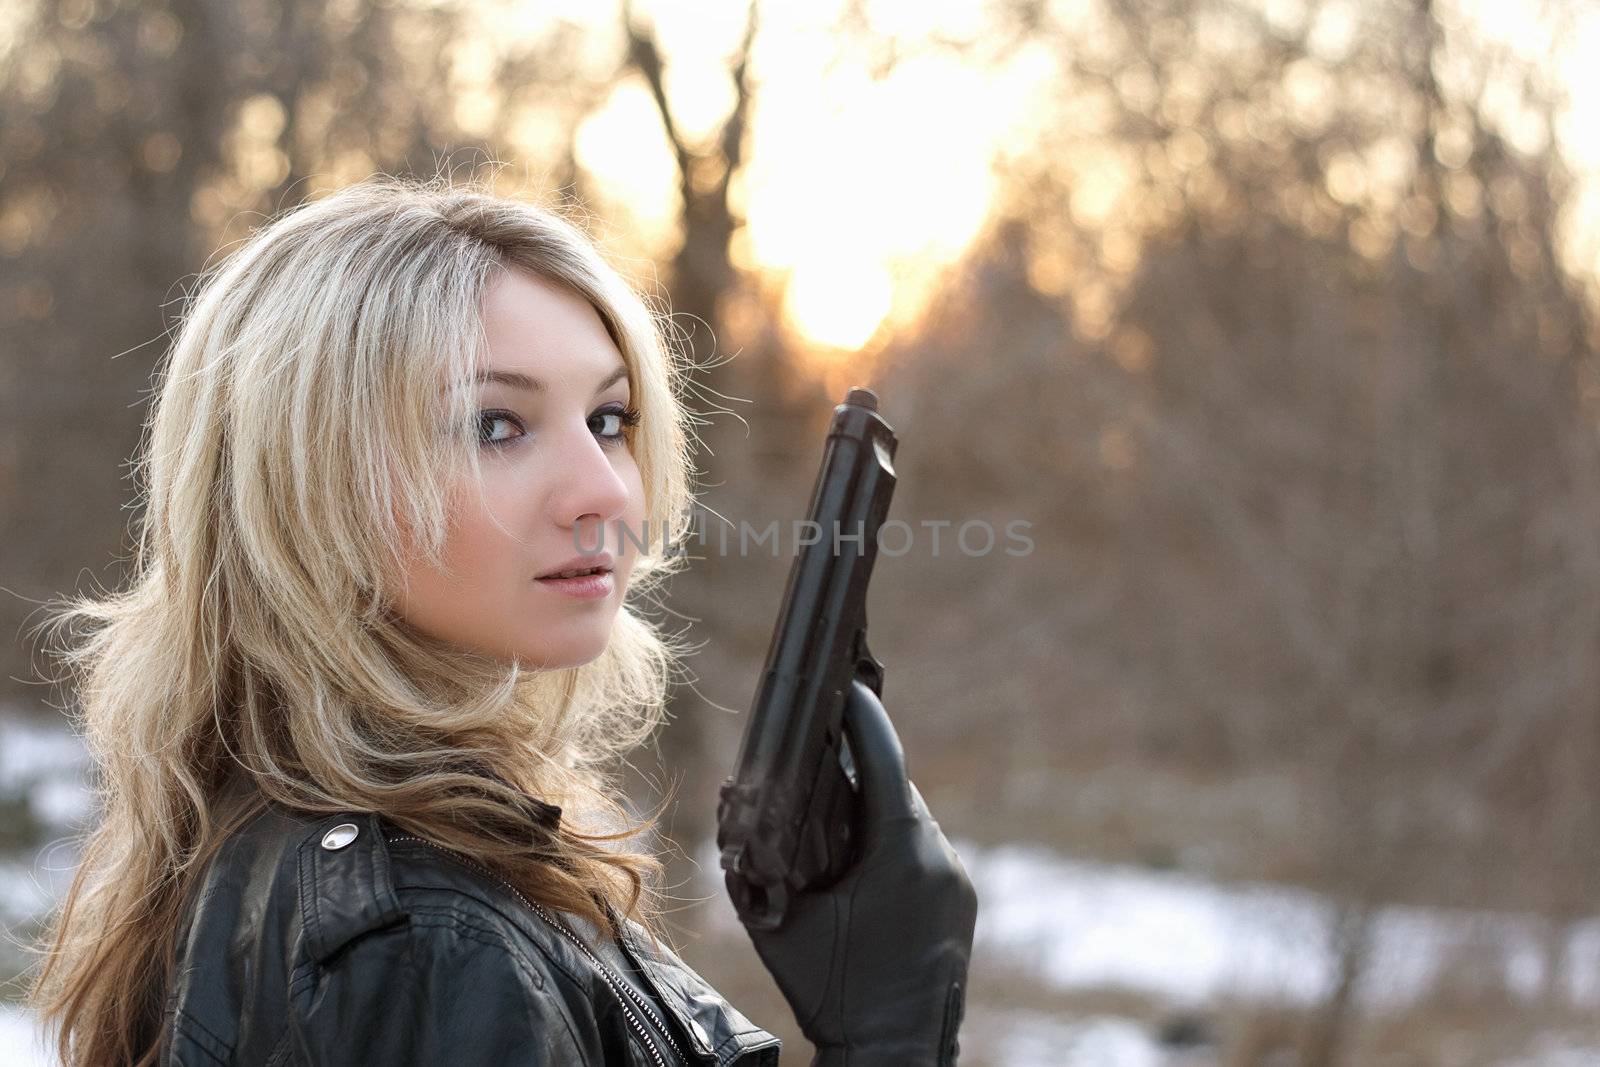 Provocative young woman holding a gun in winter forest